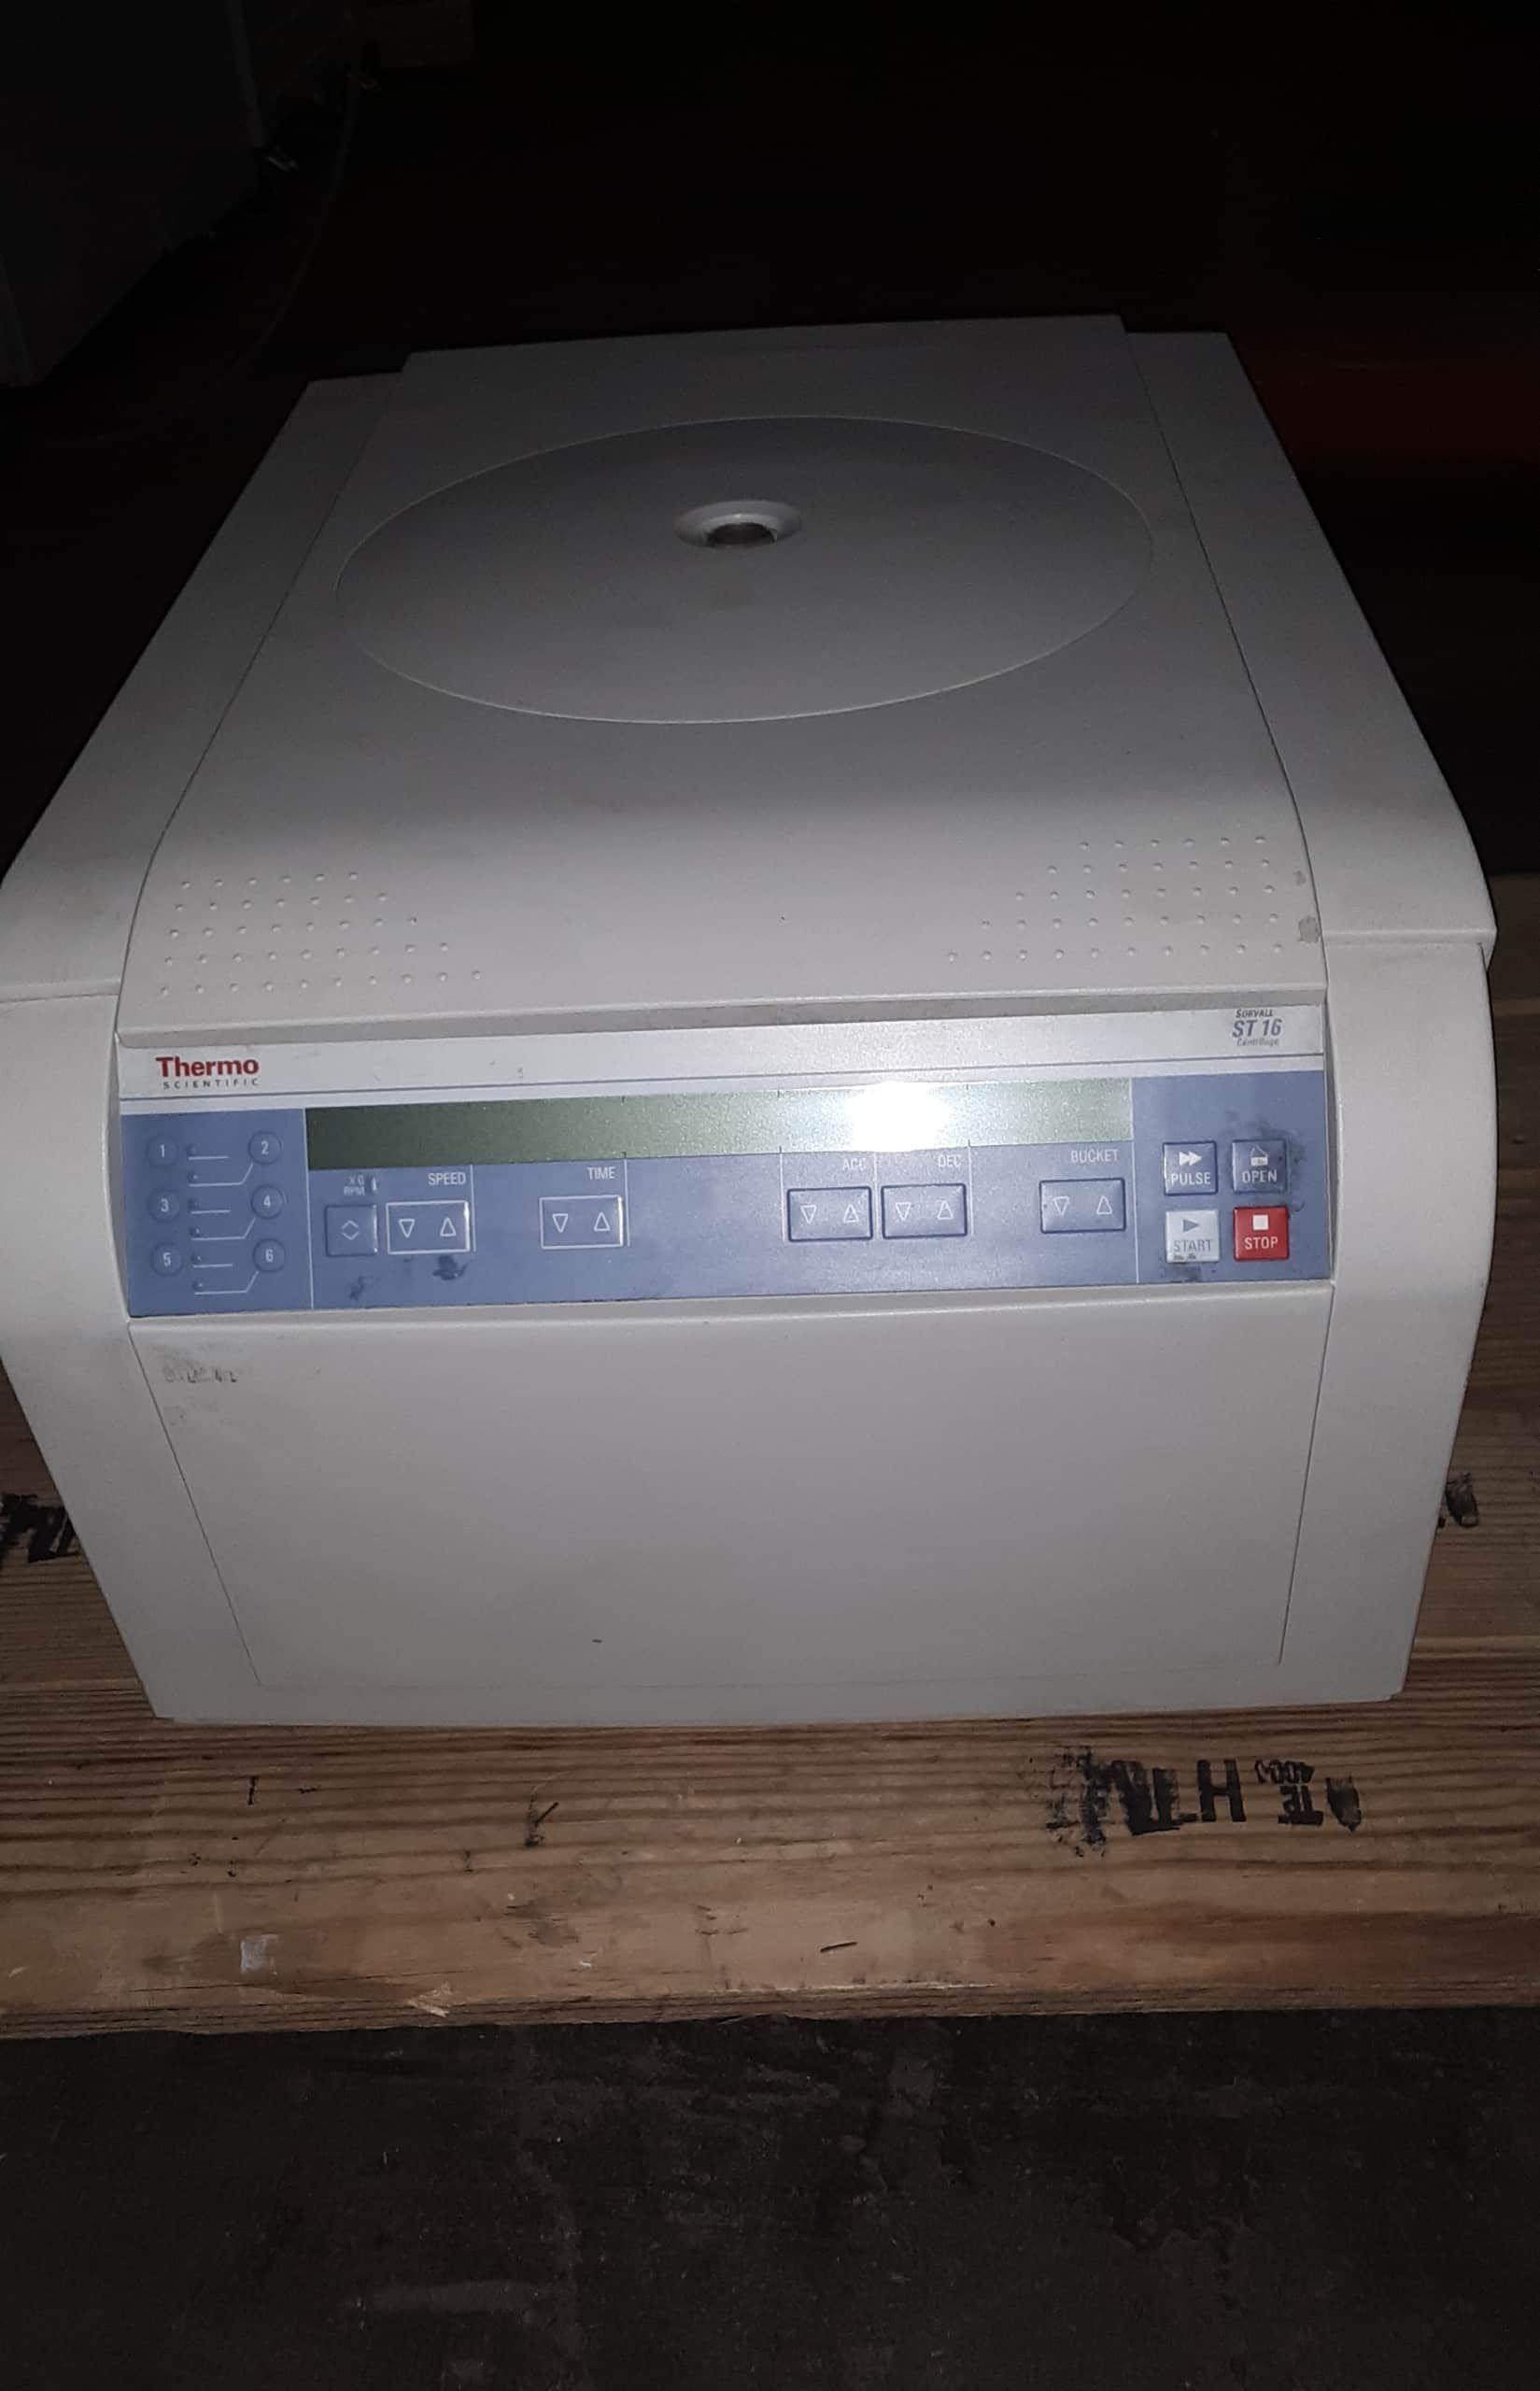 Thermo Sorvall ST16 benchtop centrifuge